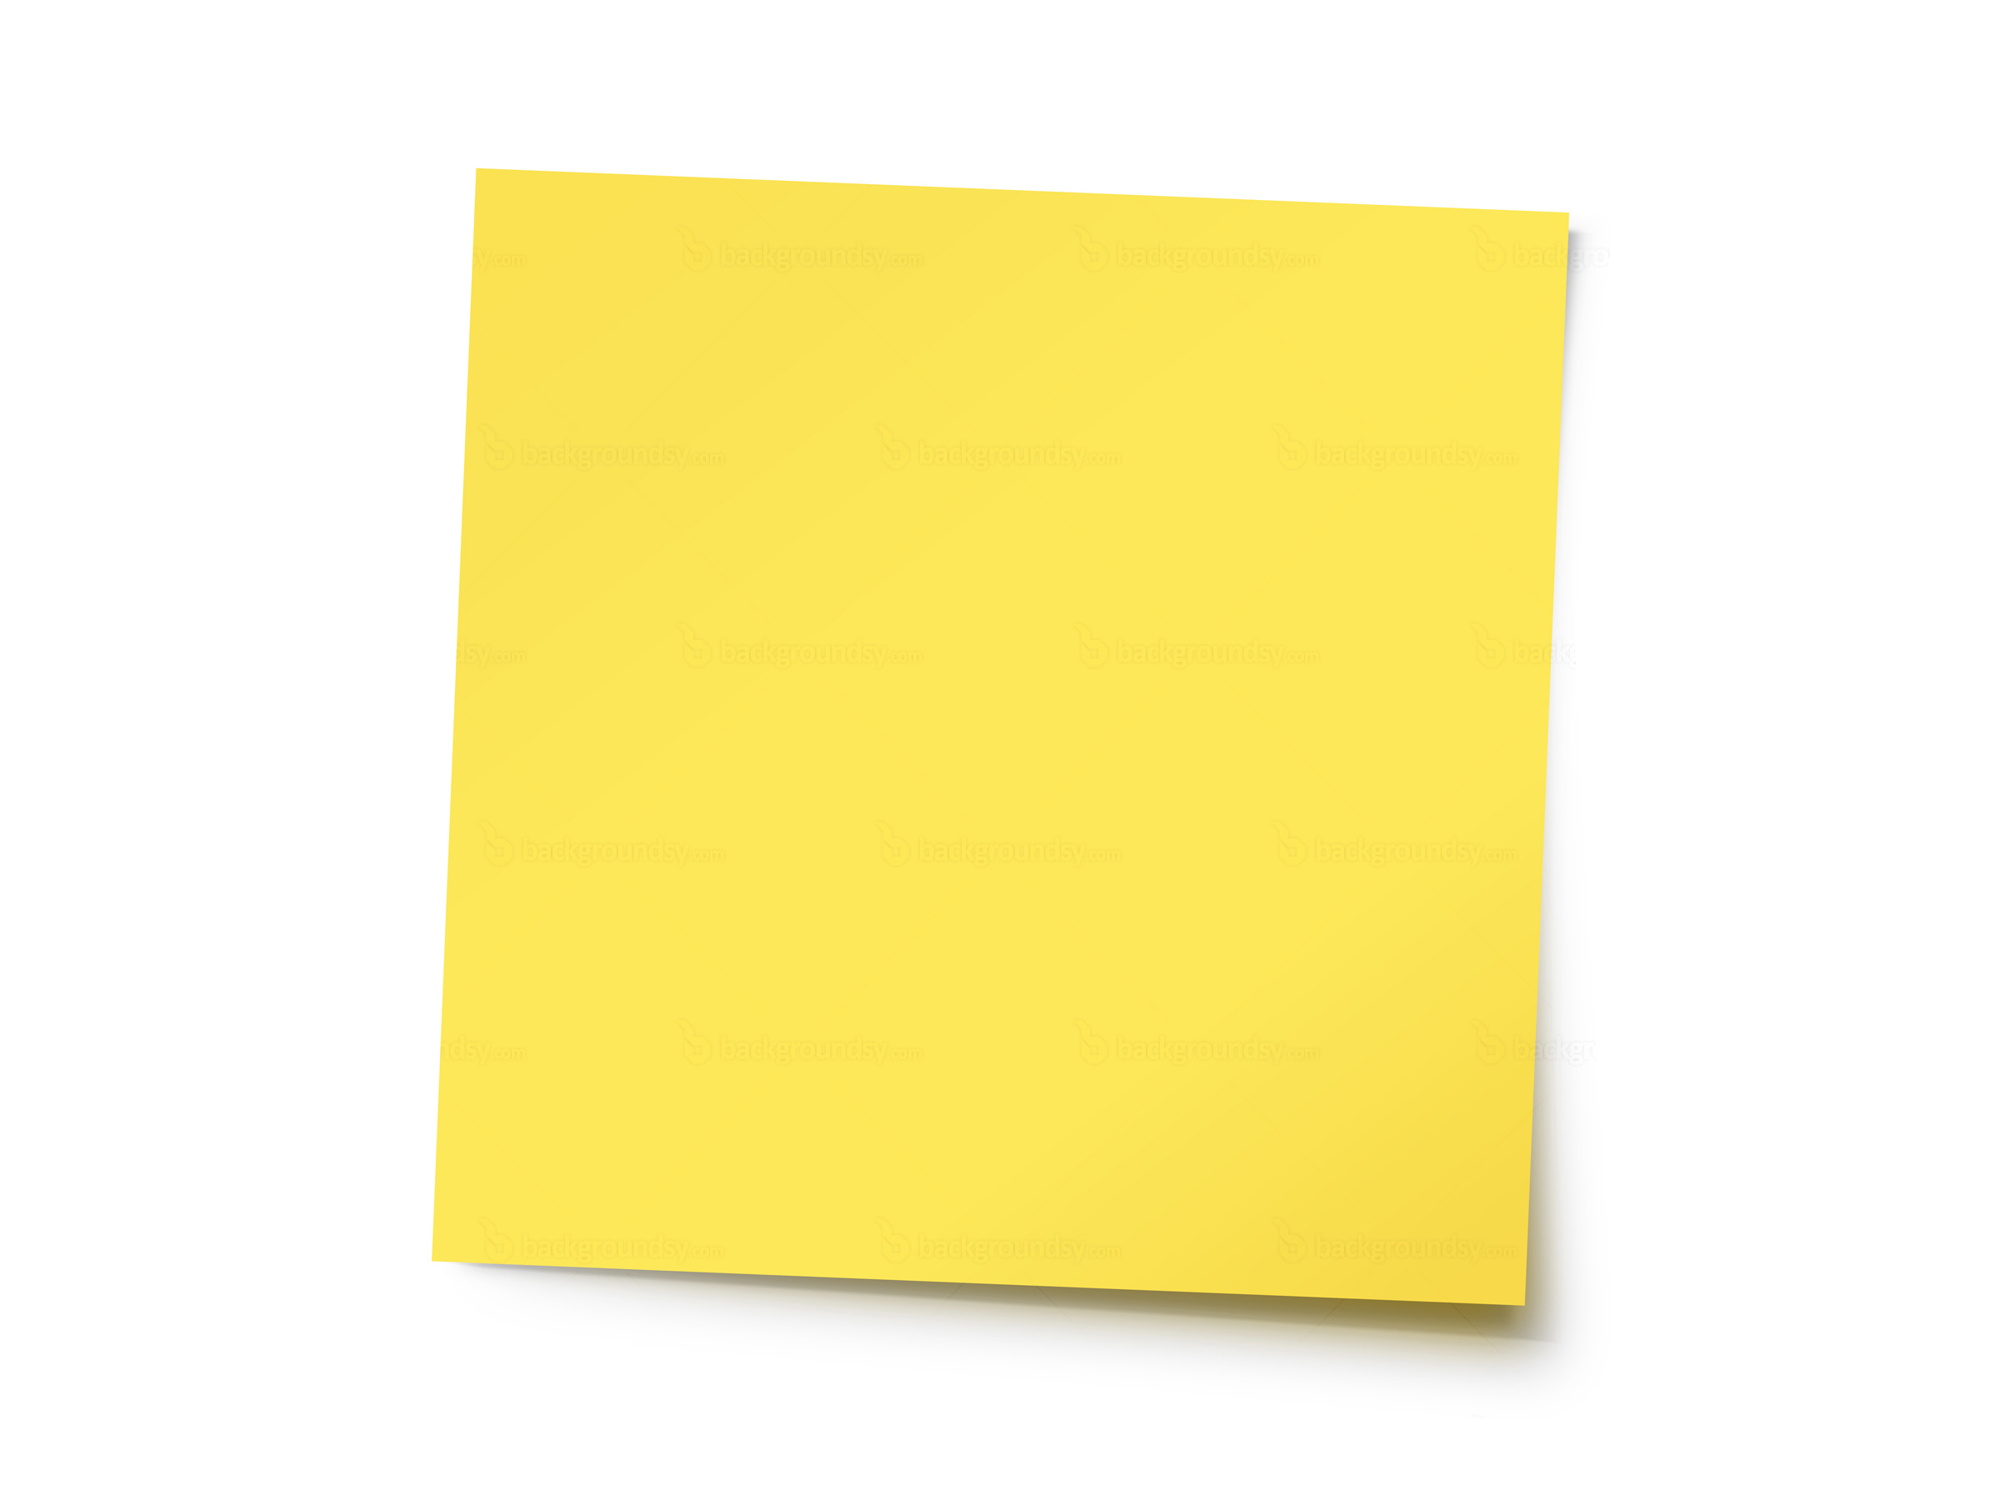 https://www.backgroundsy.com/file/large/yellow-post-it-note.jpg